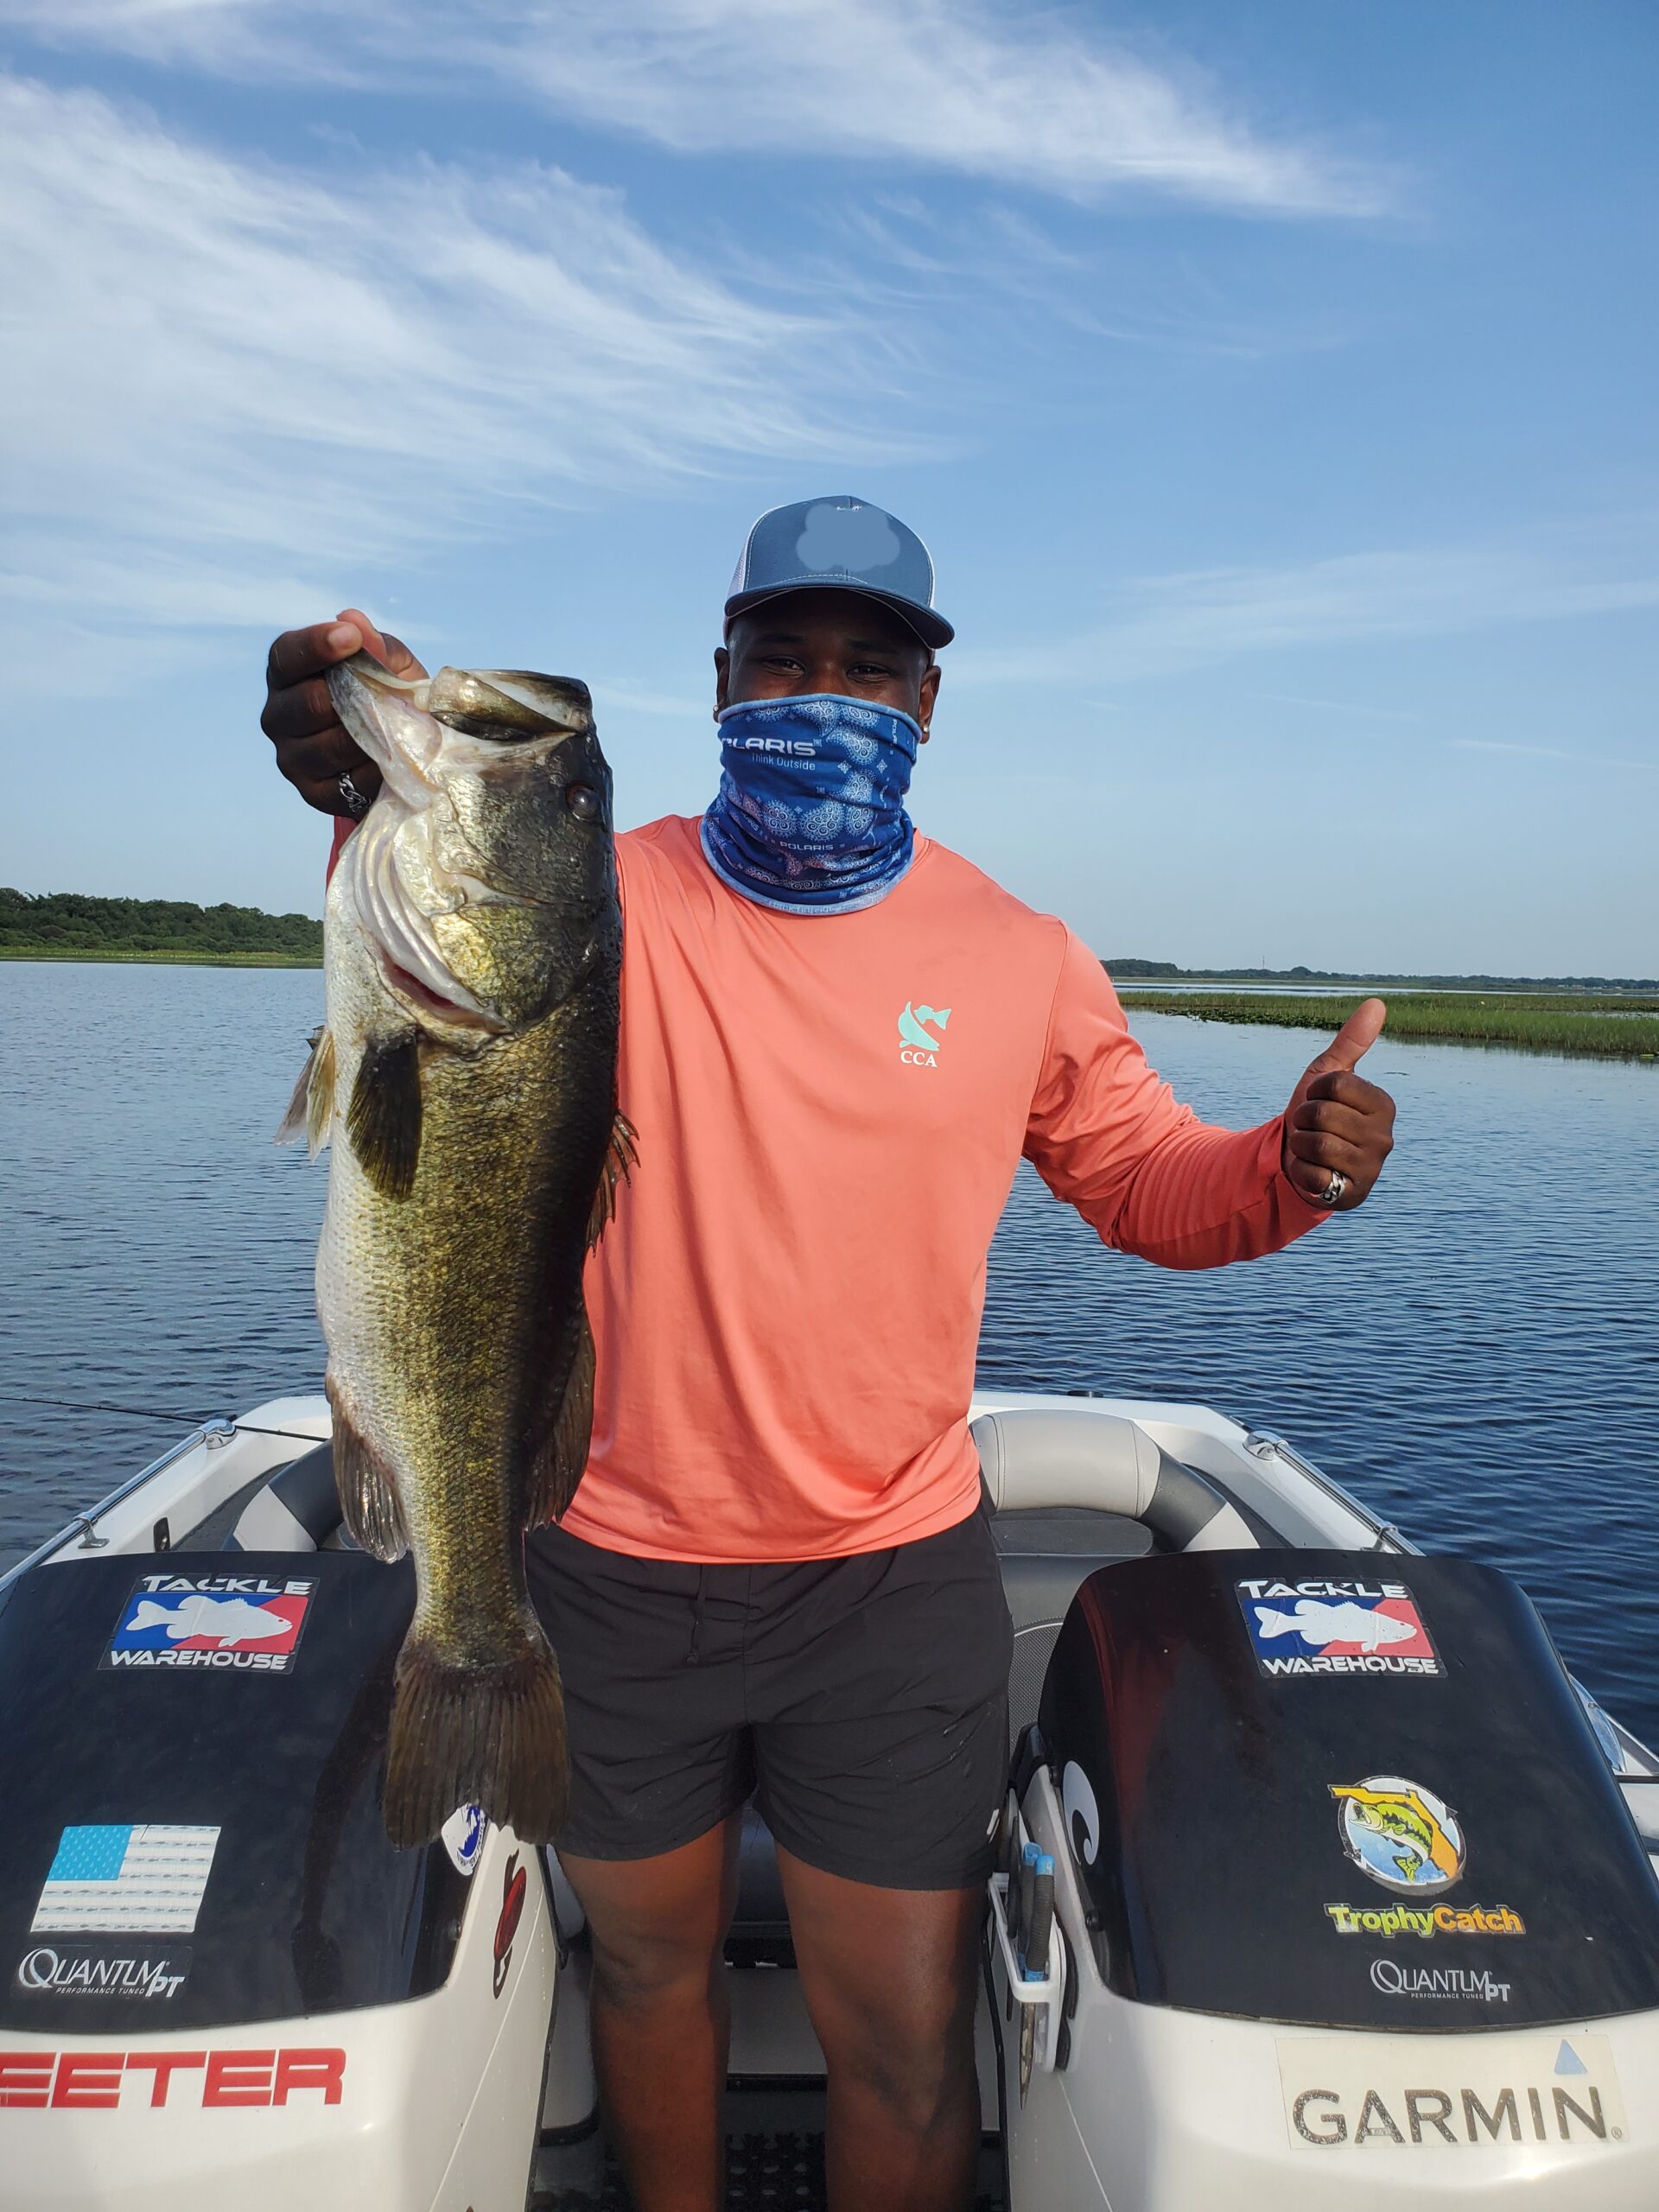 Best bass fishing in Florida Archives - Orlando Bass Guide